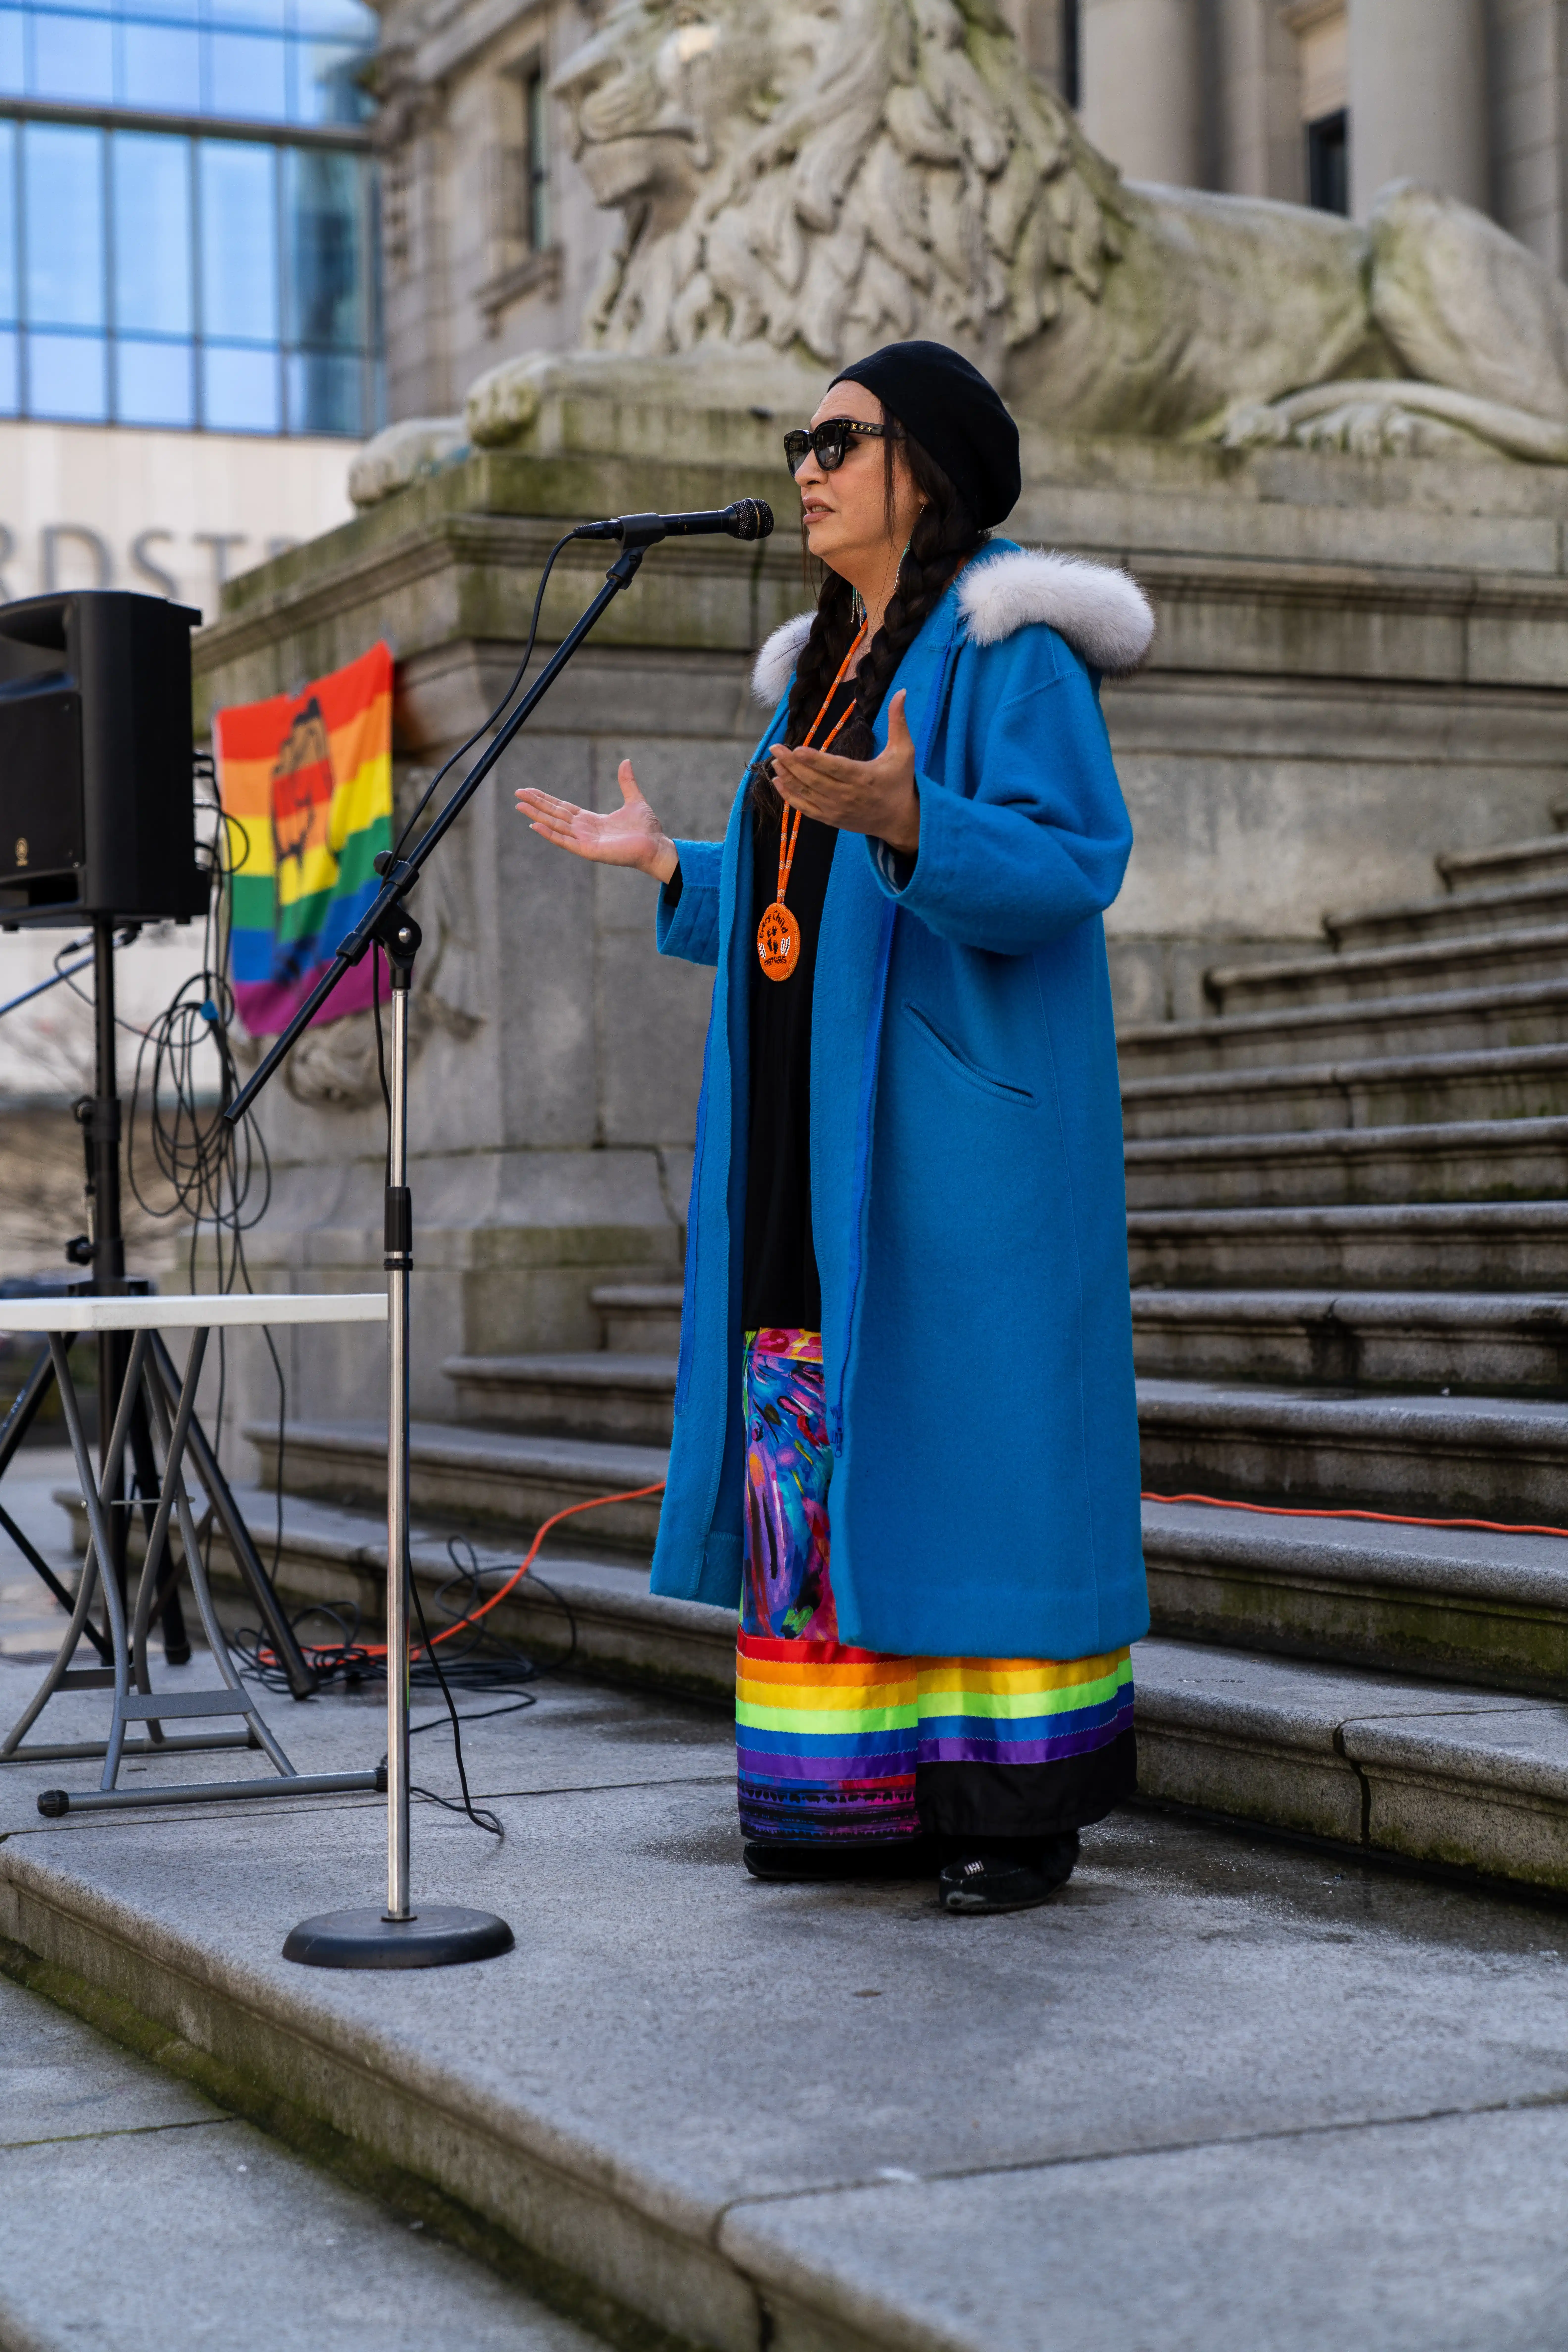 This is an image of Jaylene Tyme, speaking to the crowd. She is speaking into a microphone on large stone stairs outside. 